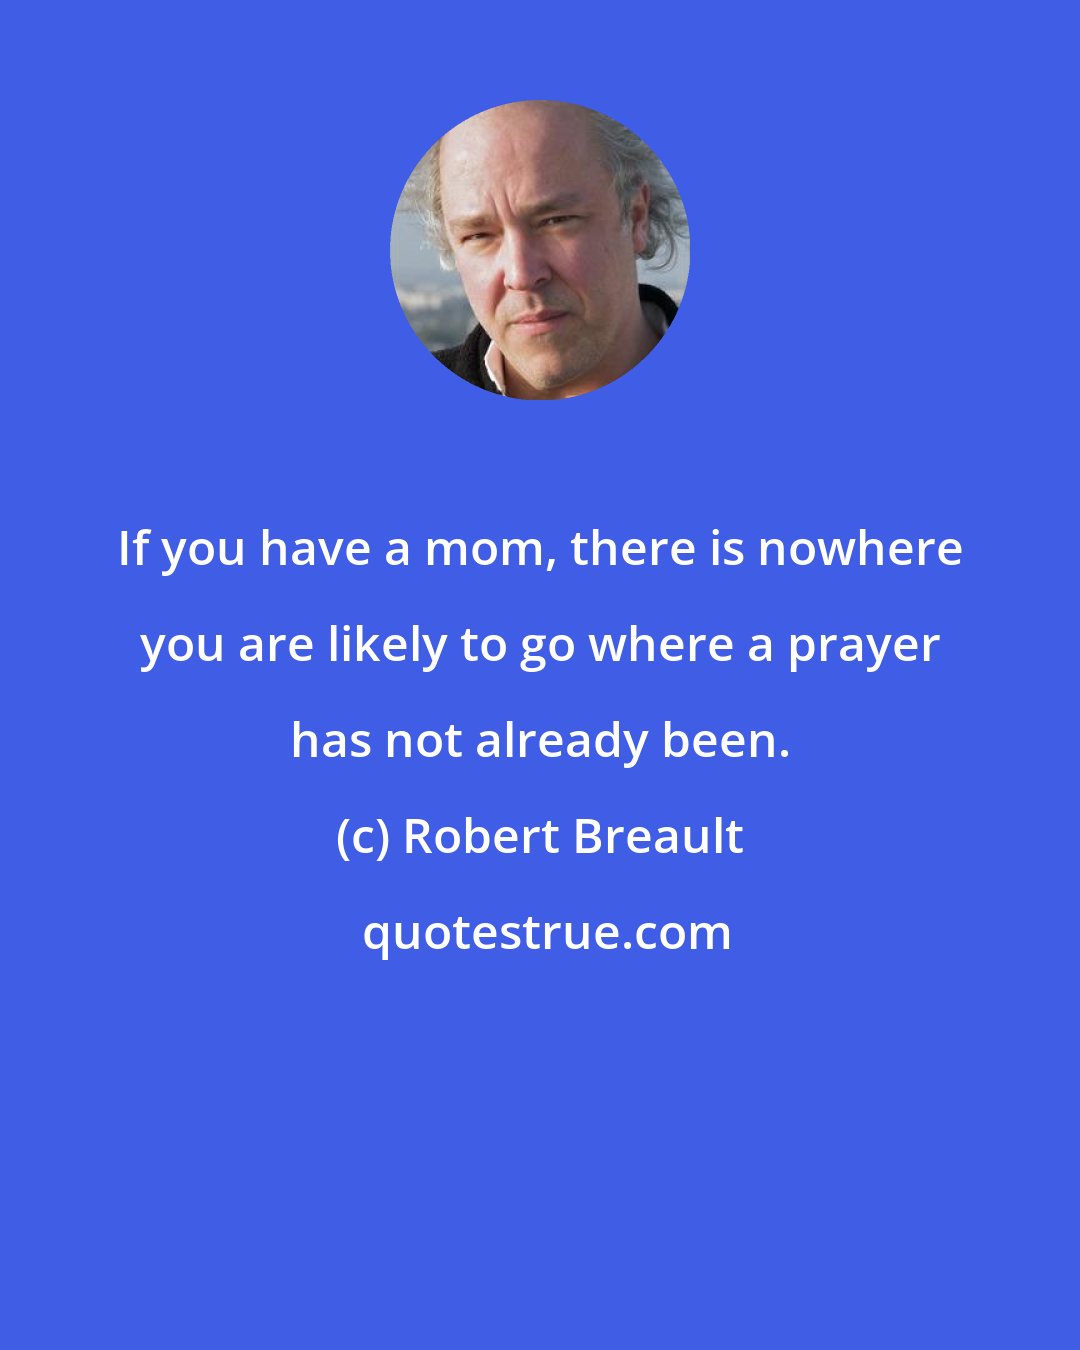 Robert Breault: If you have a mom, there is nowhere you are likely to go where a prayer has not already been.